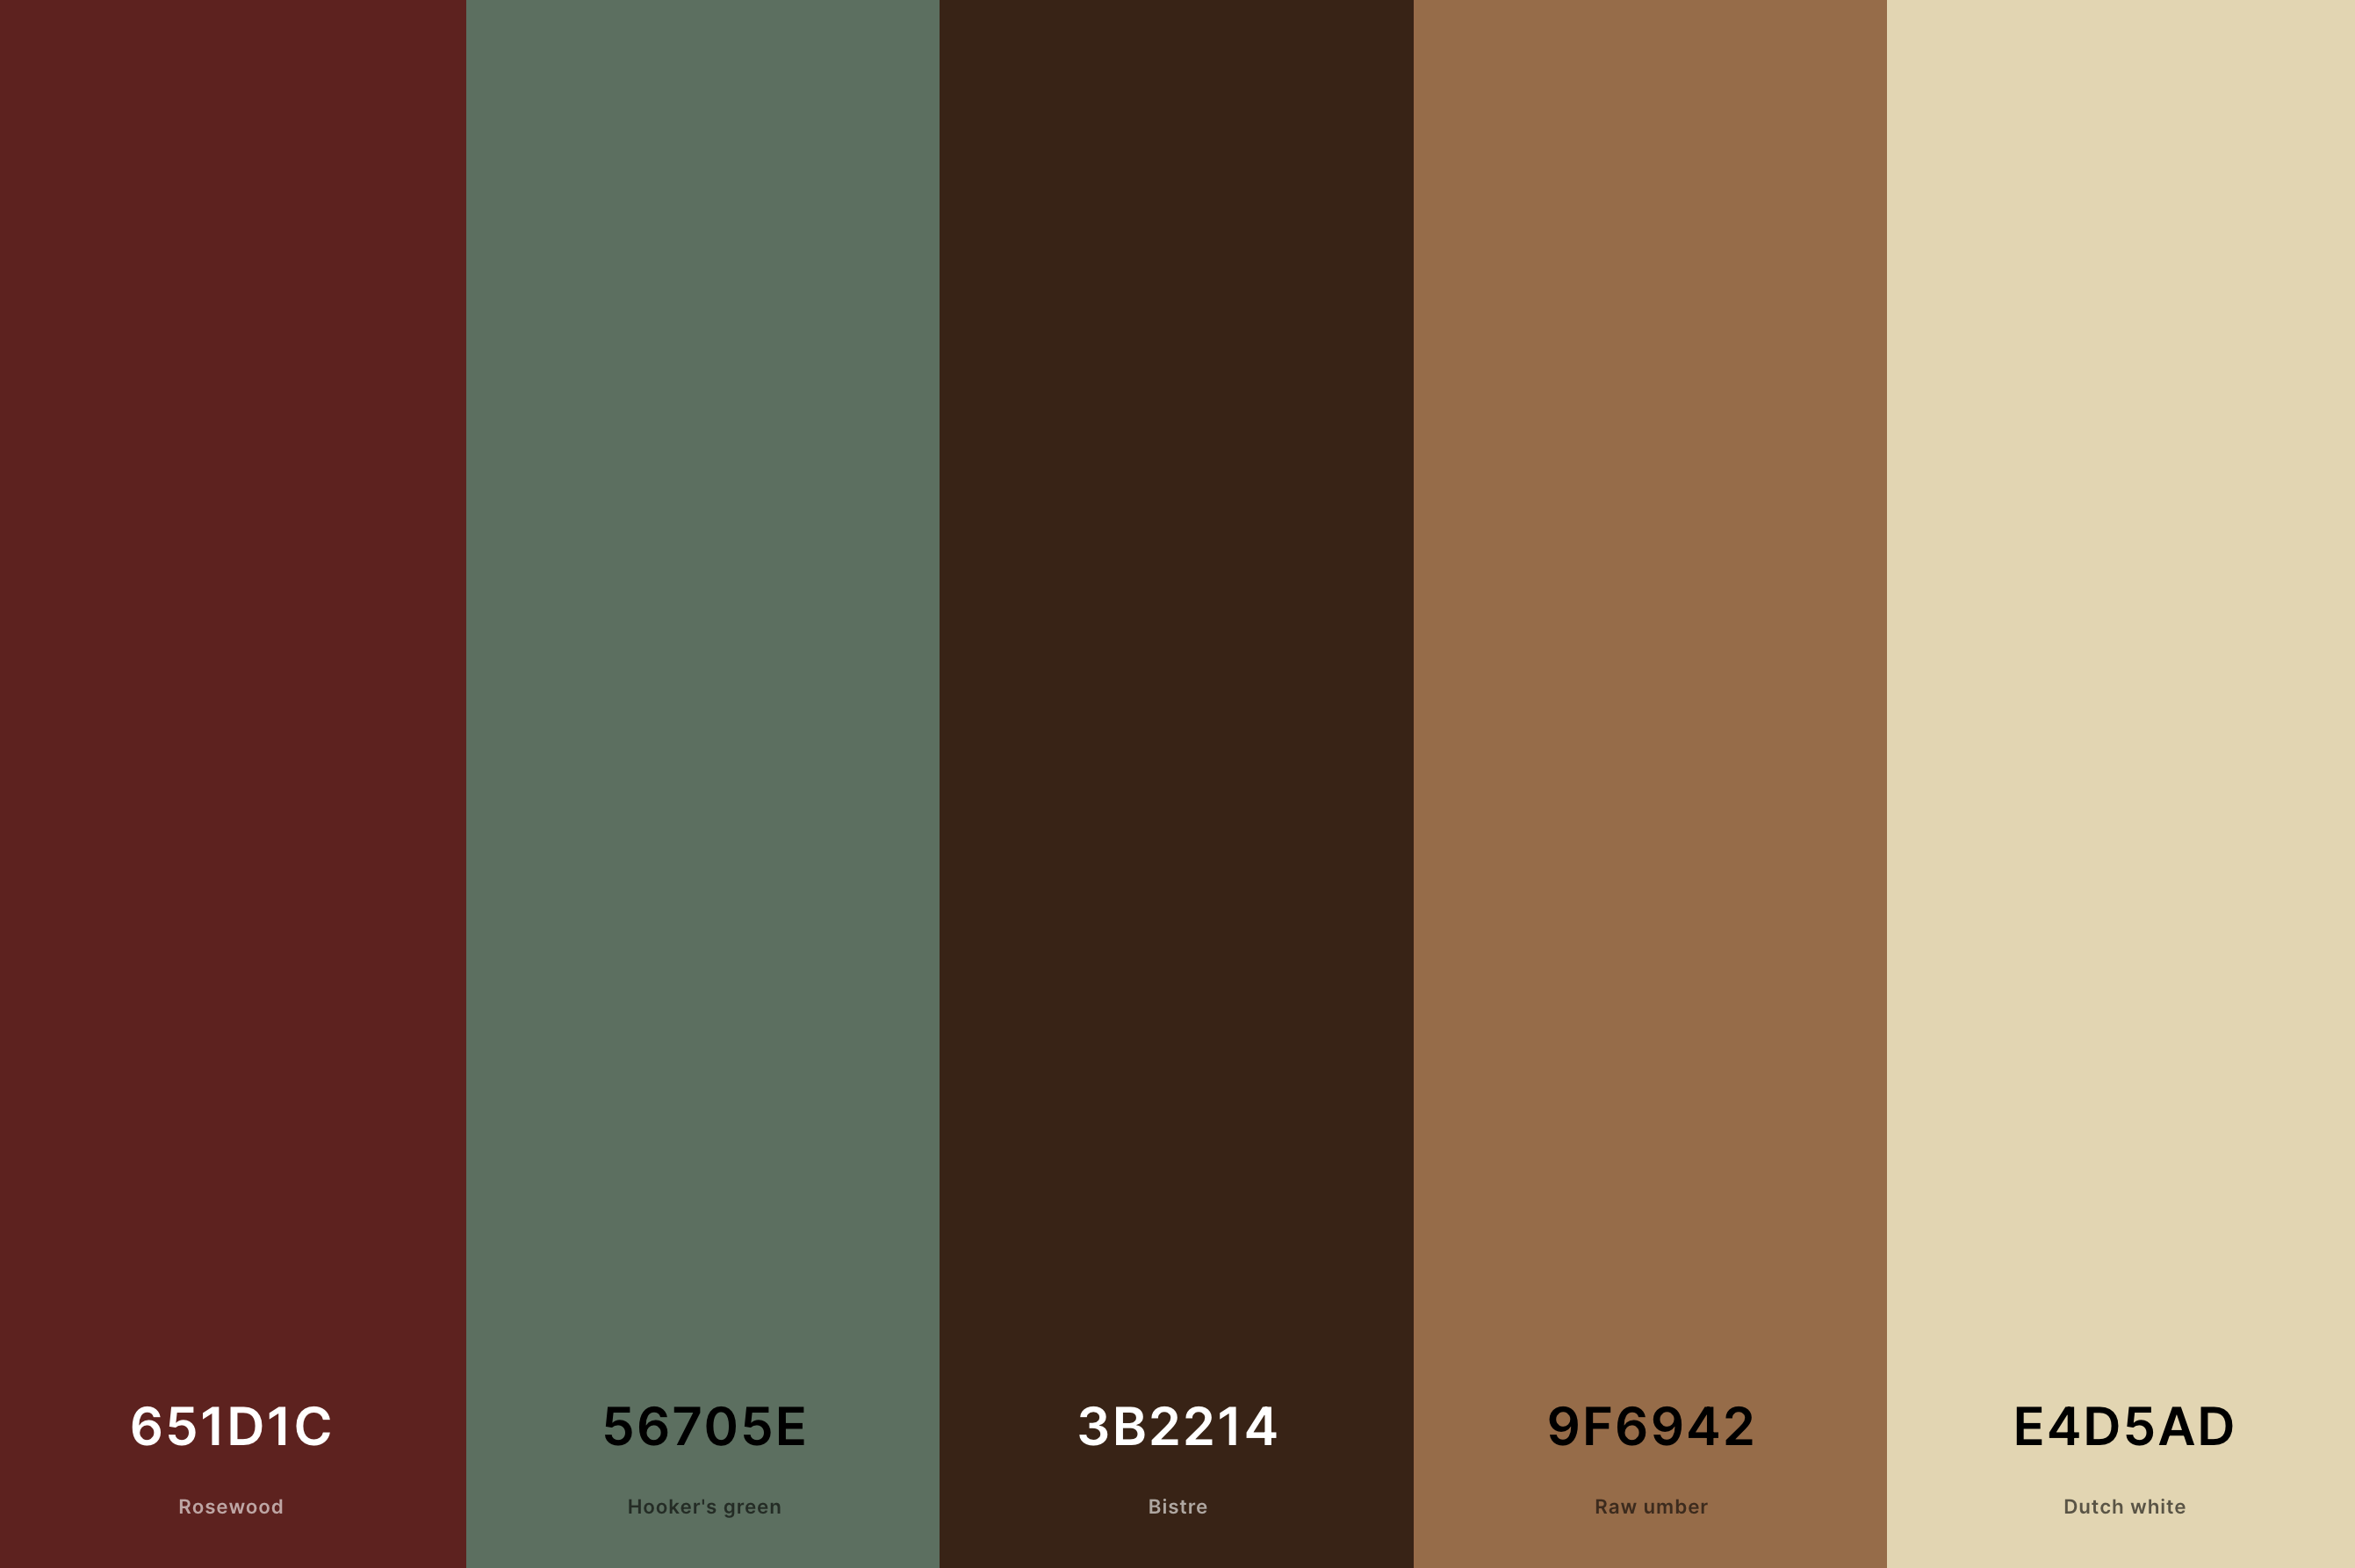 23. Neutral Fall Color Palette Color Palette with Rosewood (Hex #651D1C) + Hooker'S Green (Hex #56705E) + Bistre (Hex #3B2214) + Raw Umber (Hex #9F6942) + Dutch White (Hex #E4D5AD) Color Palette with Hex Codes